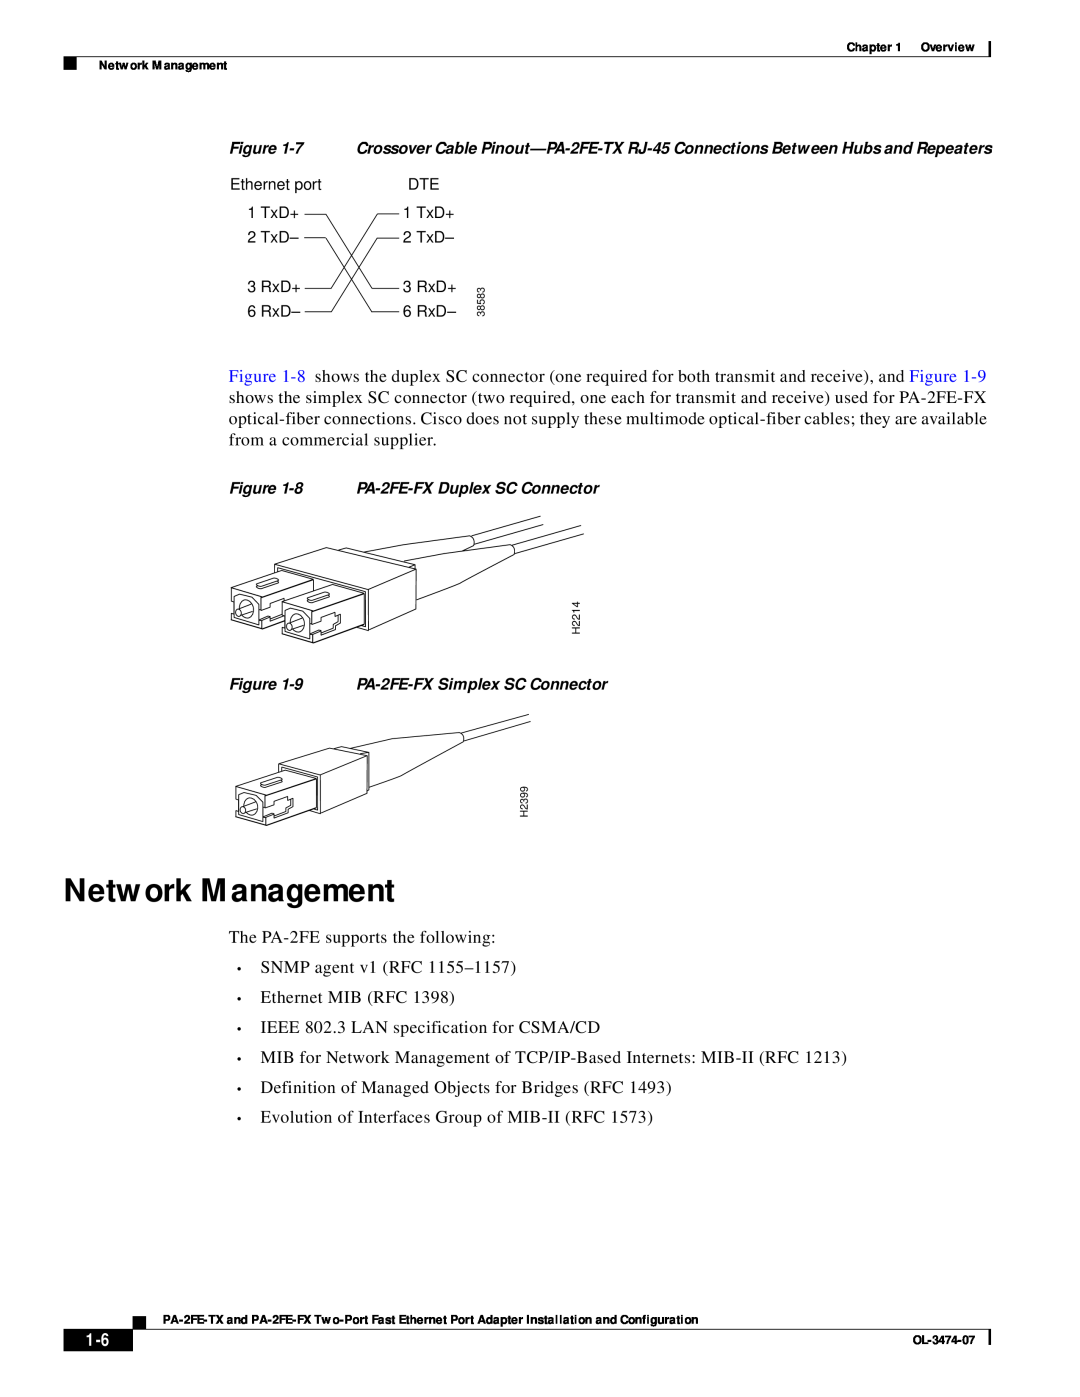 Cisco Systems PA-2FE-TX, PA-2FE-FX manual Network Management 